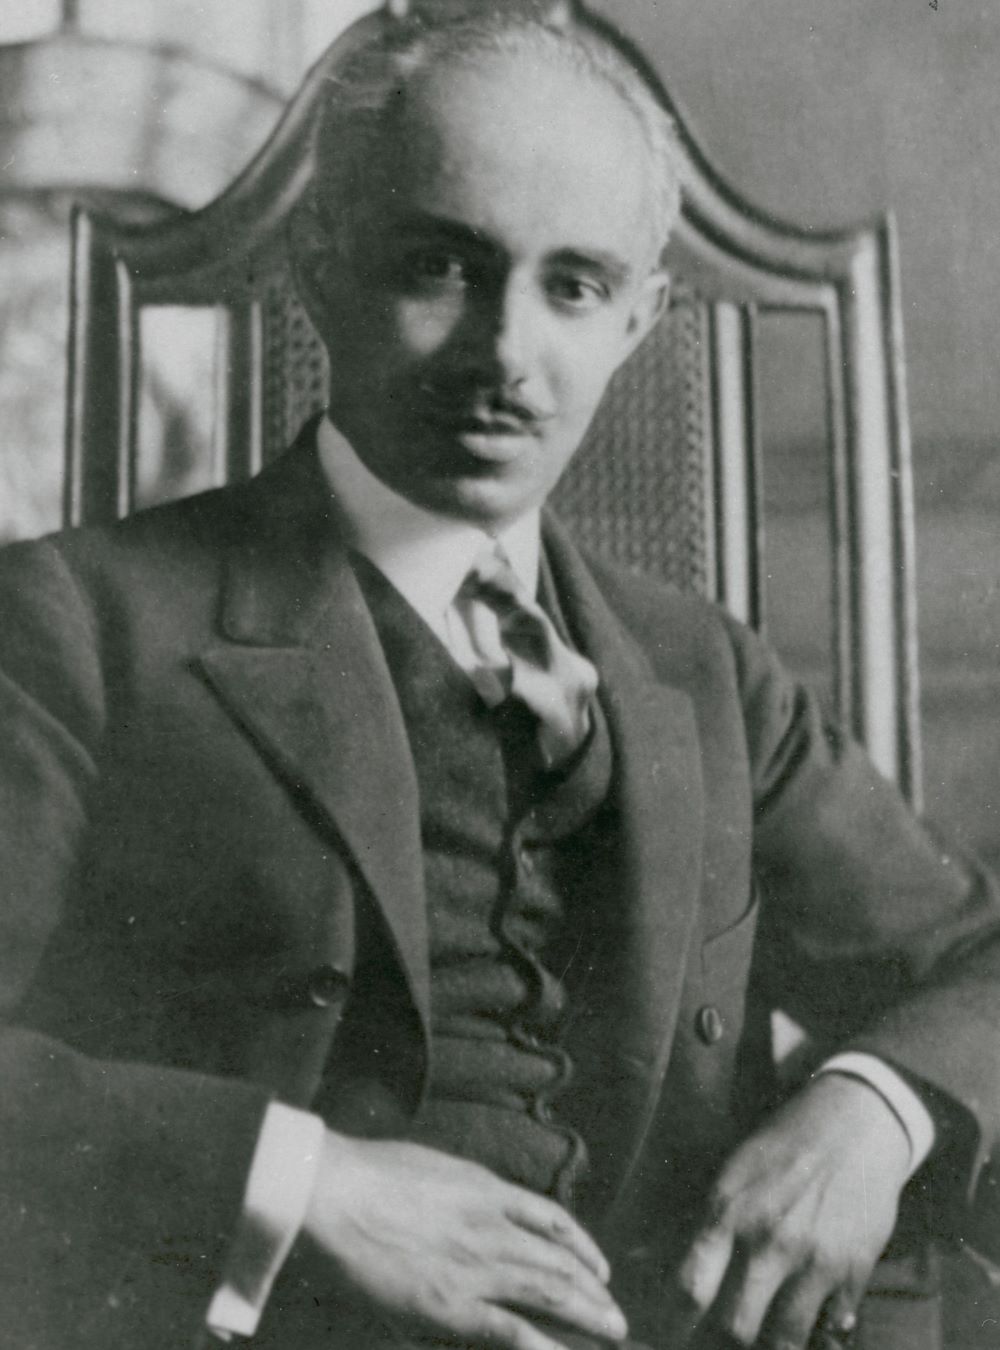 Julian Abele seated in a wooden arm chair. He is wearing a jacket, waistcoat, and has a tie.